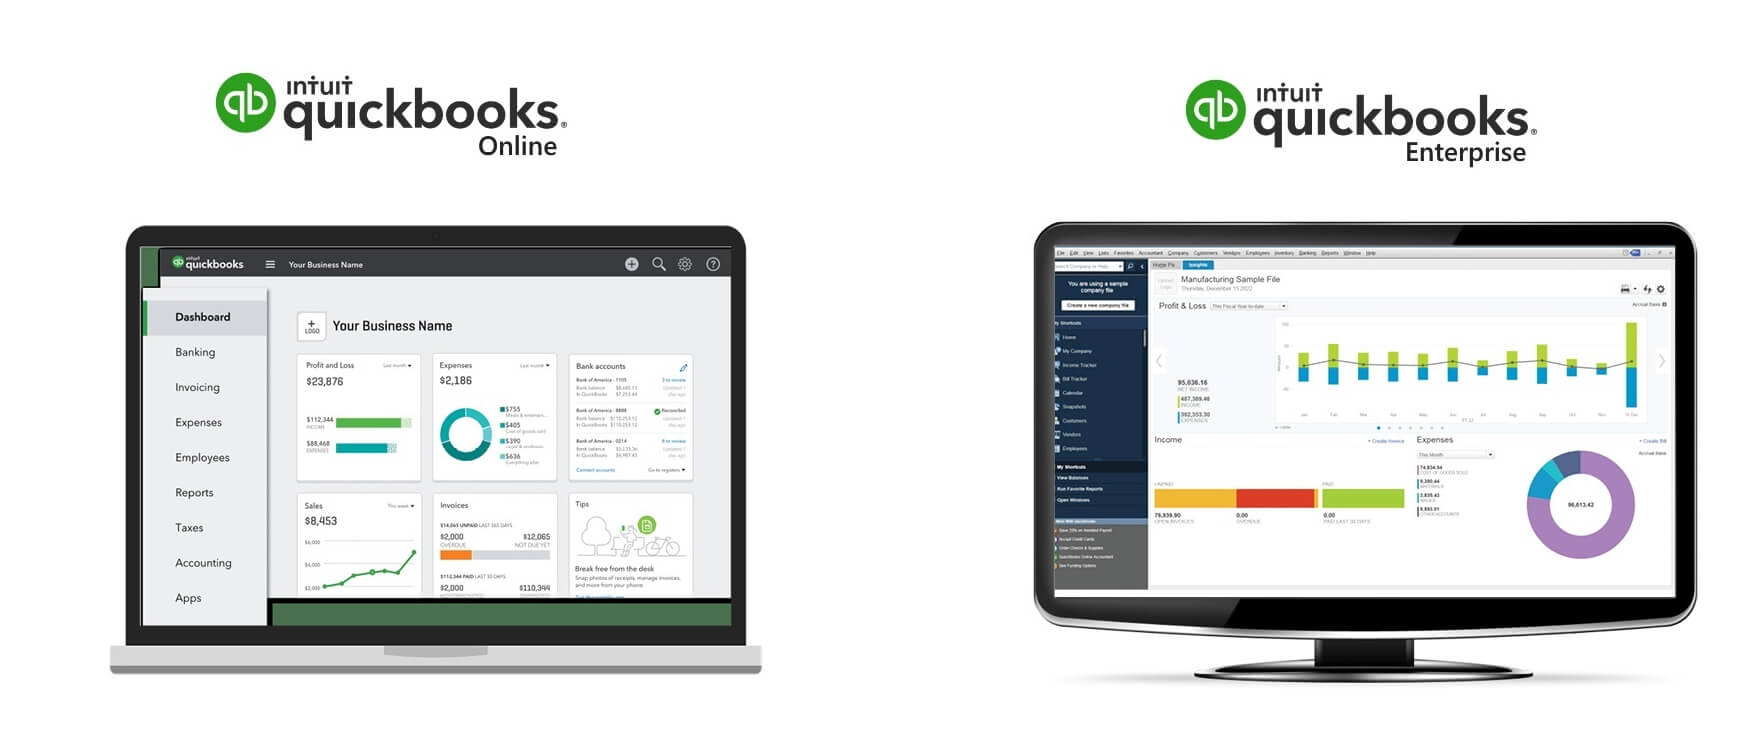 quickbooks for mac 2015 reordering chart of accounts